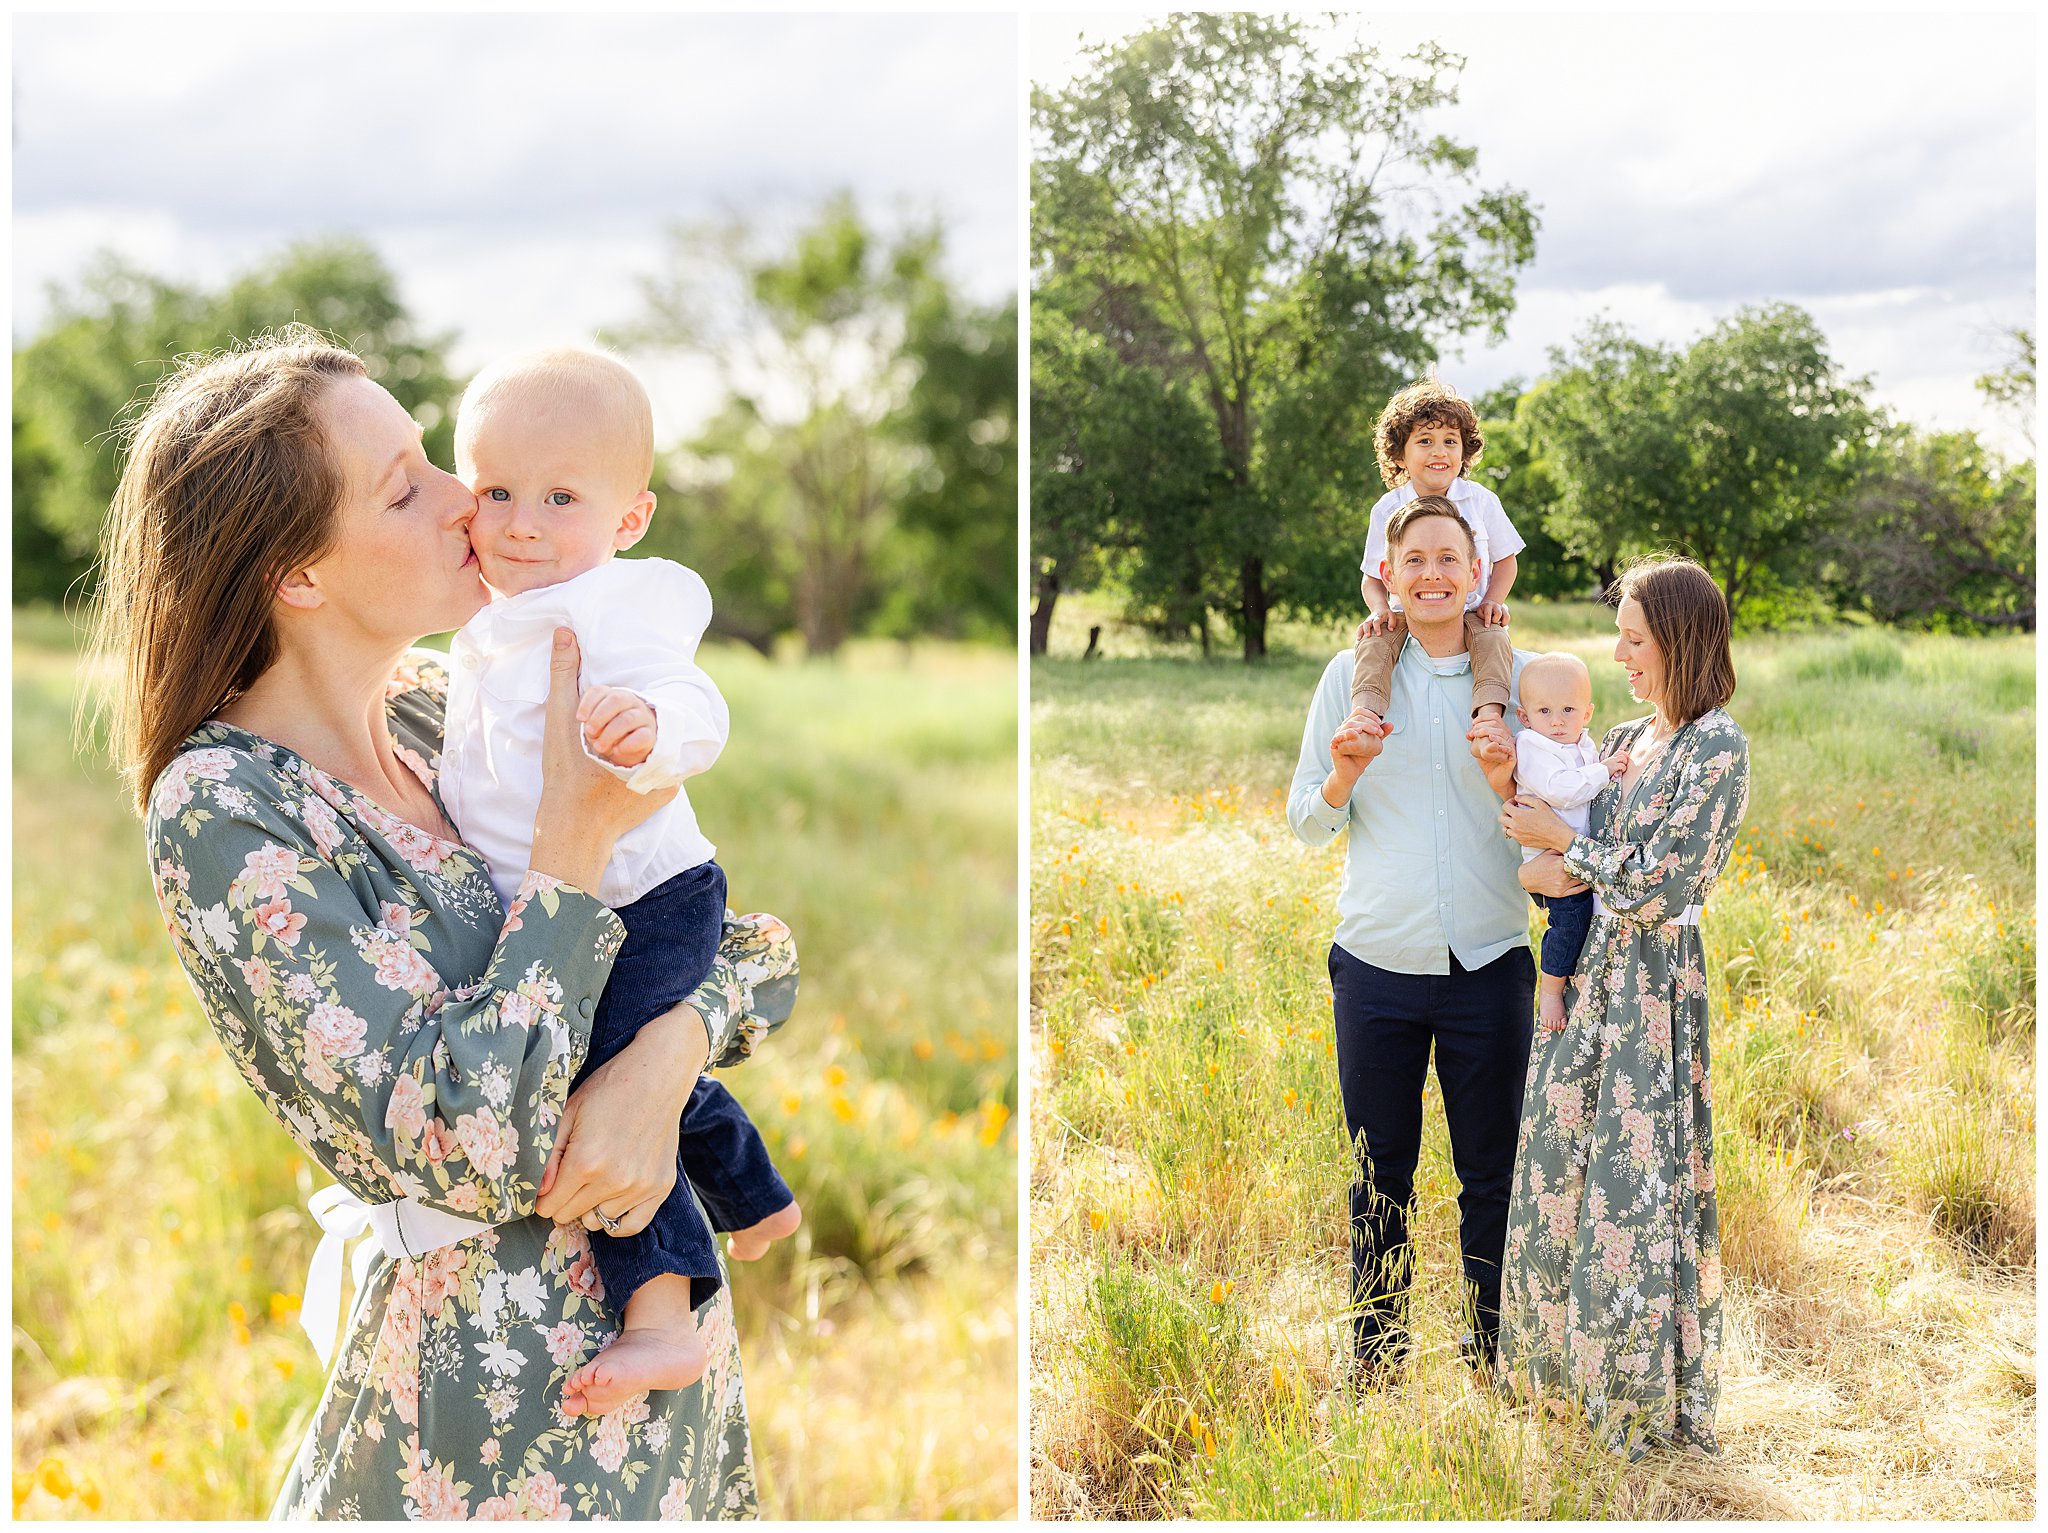 Grass Field Wildflowers Family Session California Poppy Chico CA May Spring Floral Dress Young Boys Brothers Blanket,